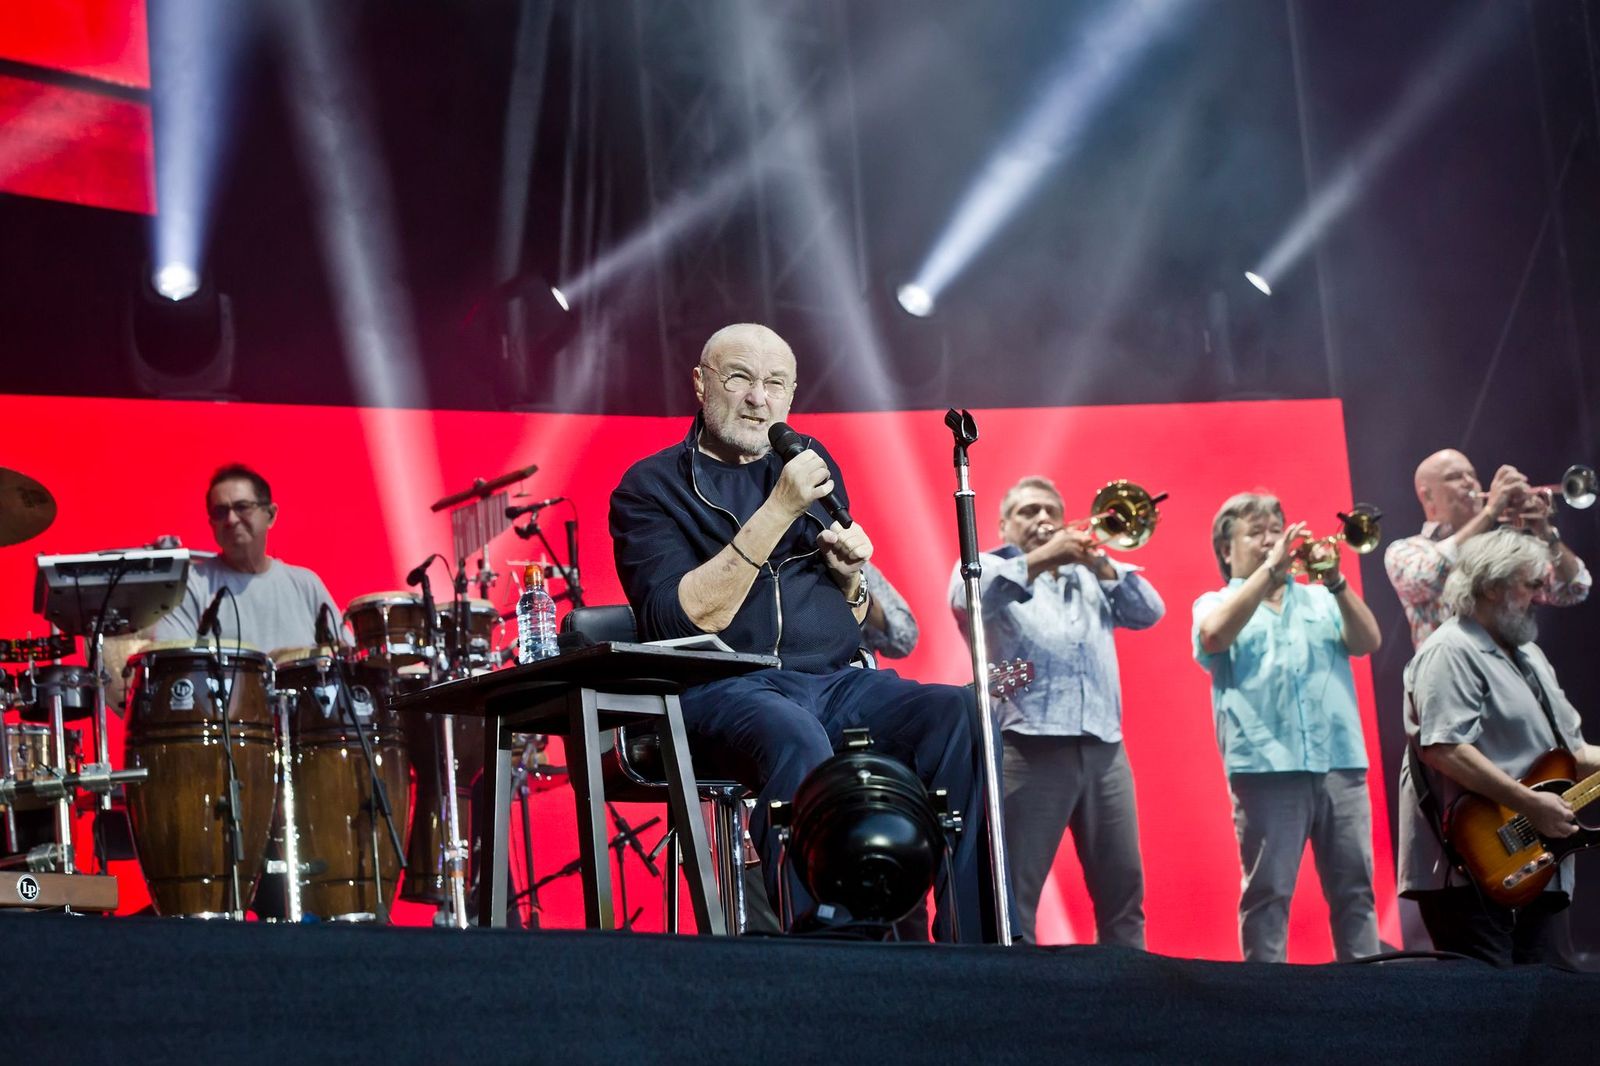 Phil Collins performs live on stage during a concert at the Olympia station on June 7, 2019, in Berlin, Germany | Photo: Getty Images